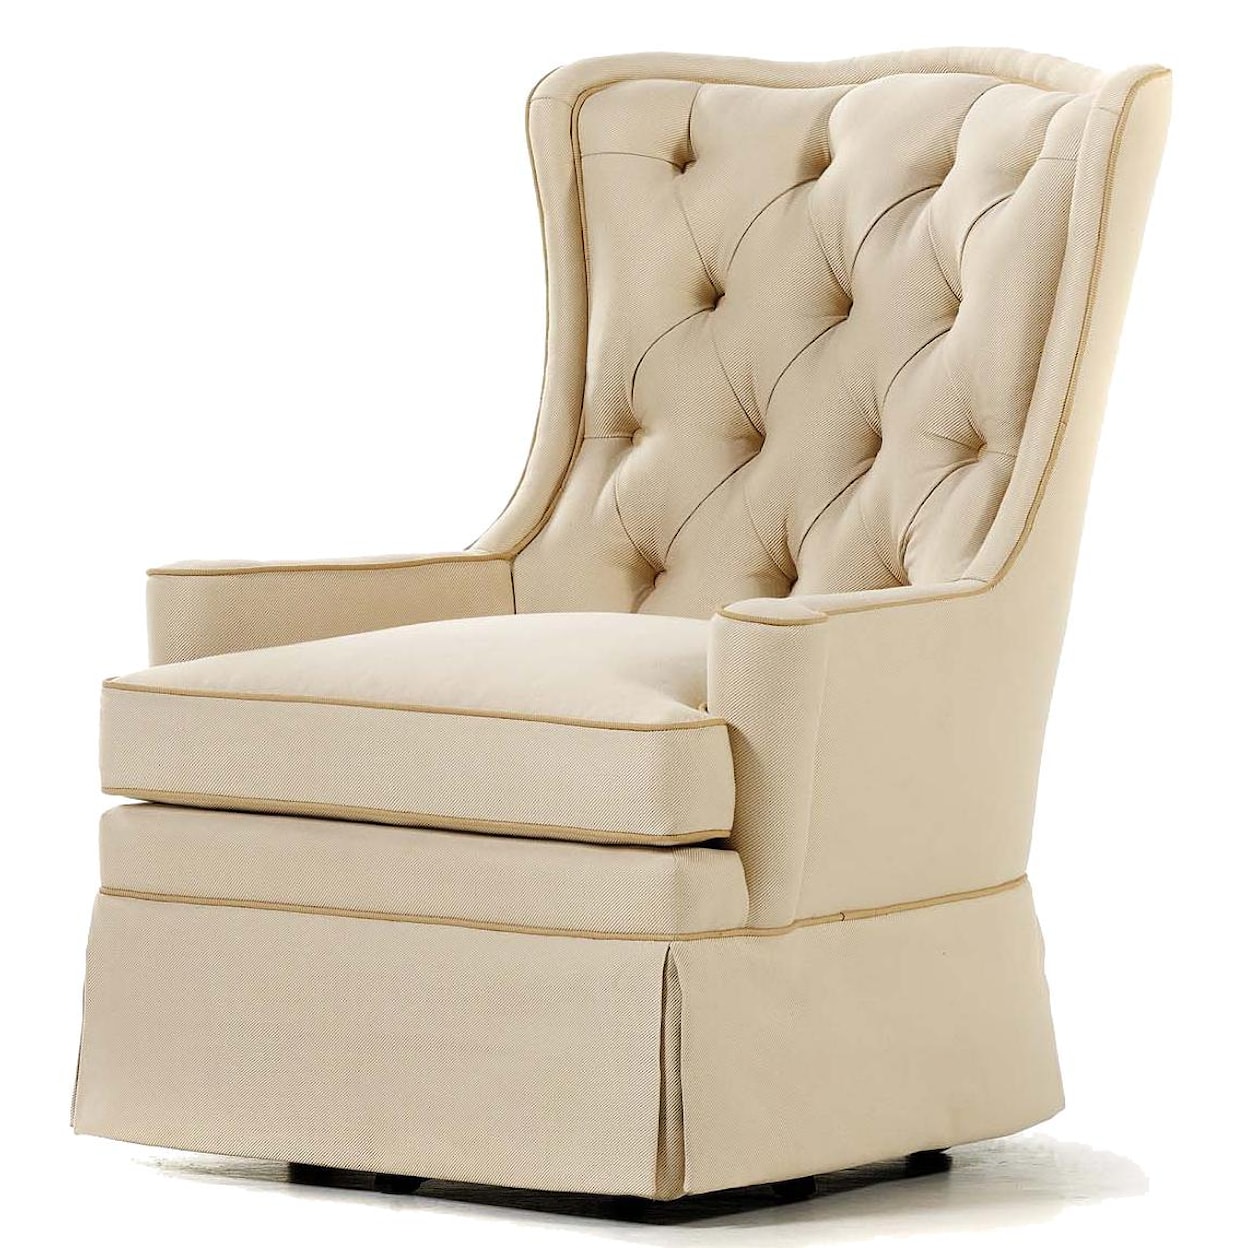 Jessica Charles Fine Upholstered Accents Libby Swivel Rocker   